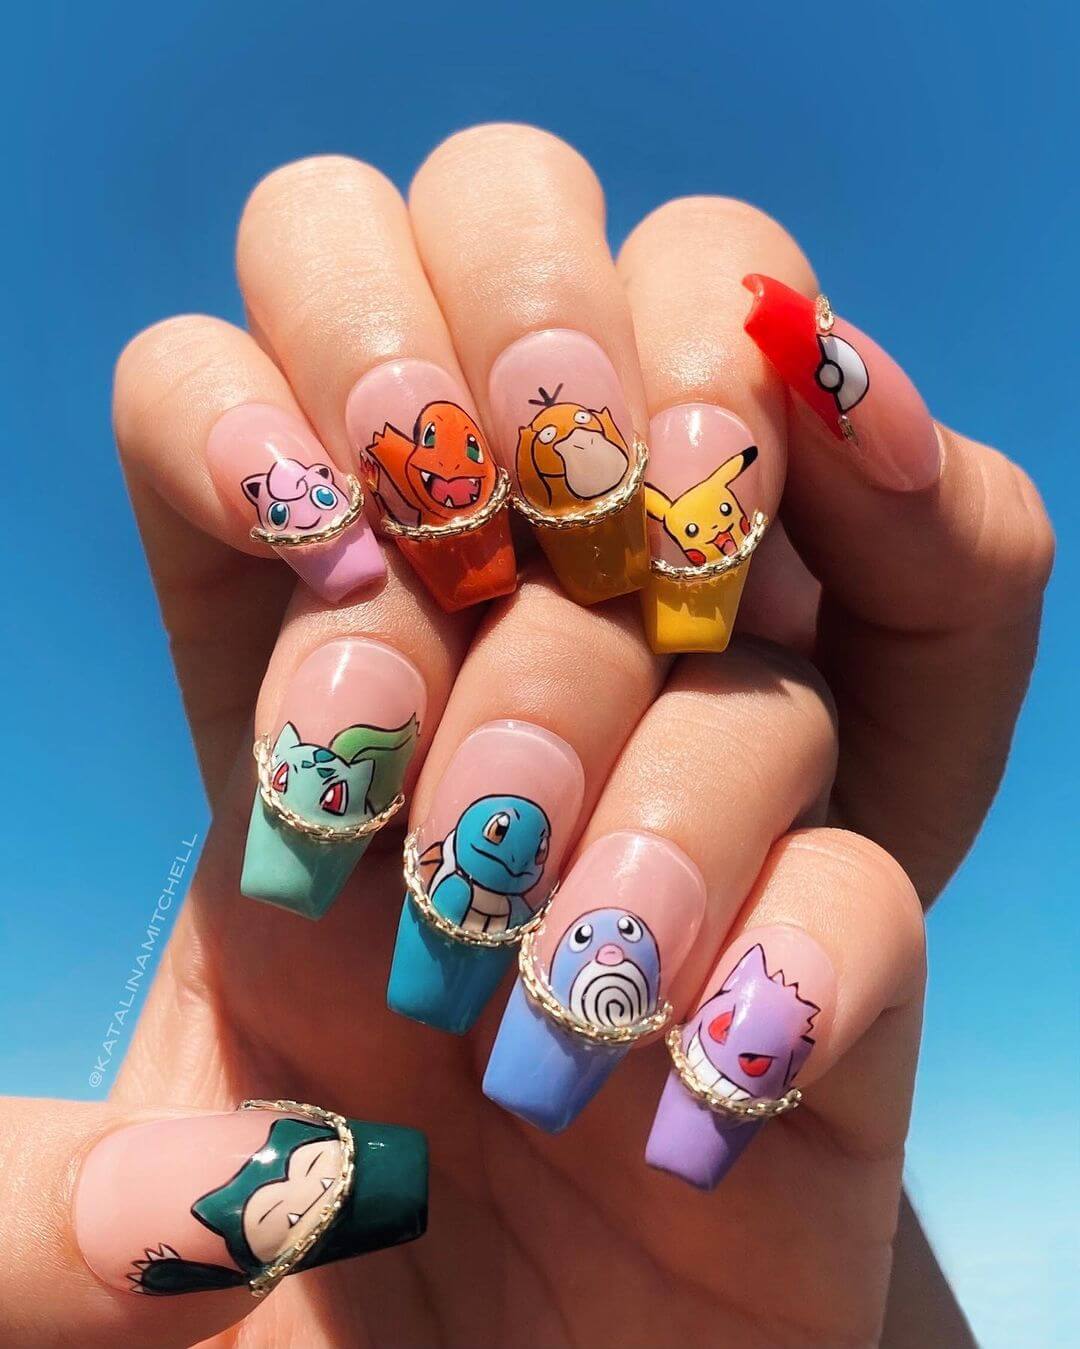 Pikachu And Pokemon Nail Art Designs A very innovative way to show your love for pikachu and other characters